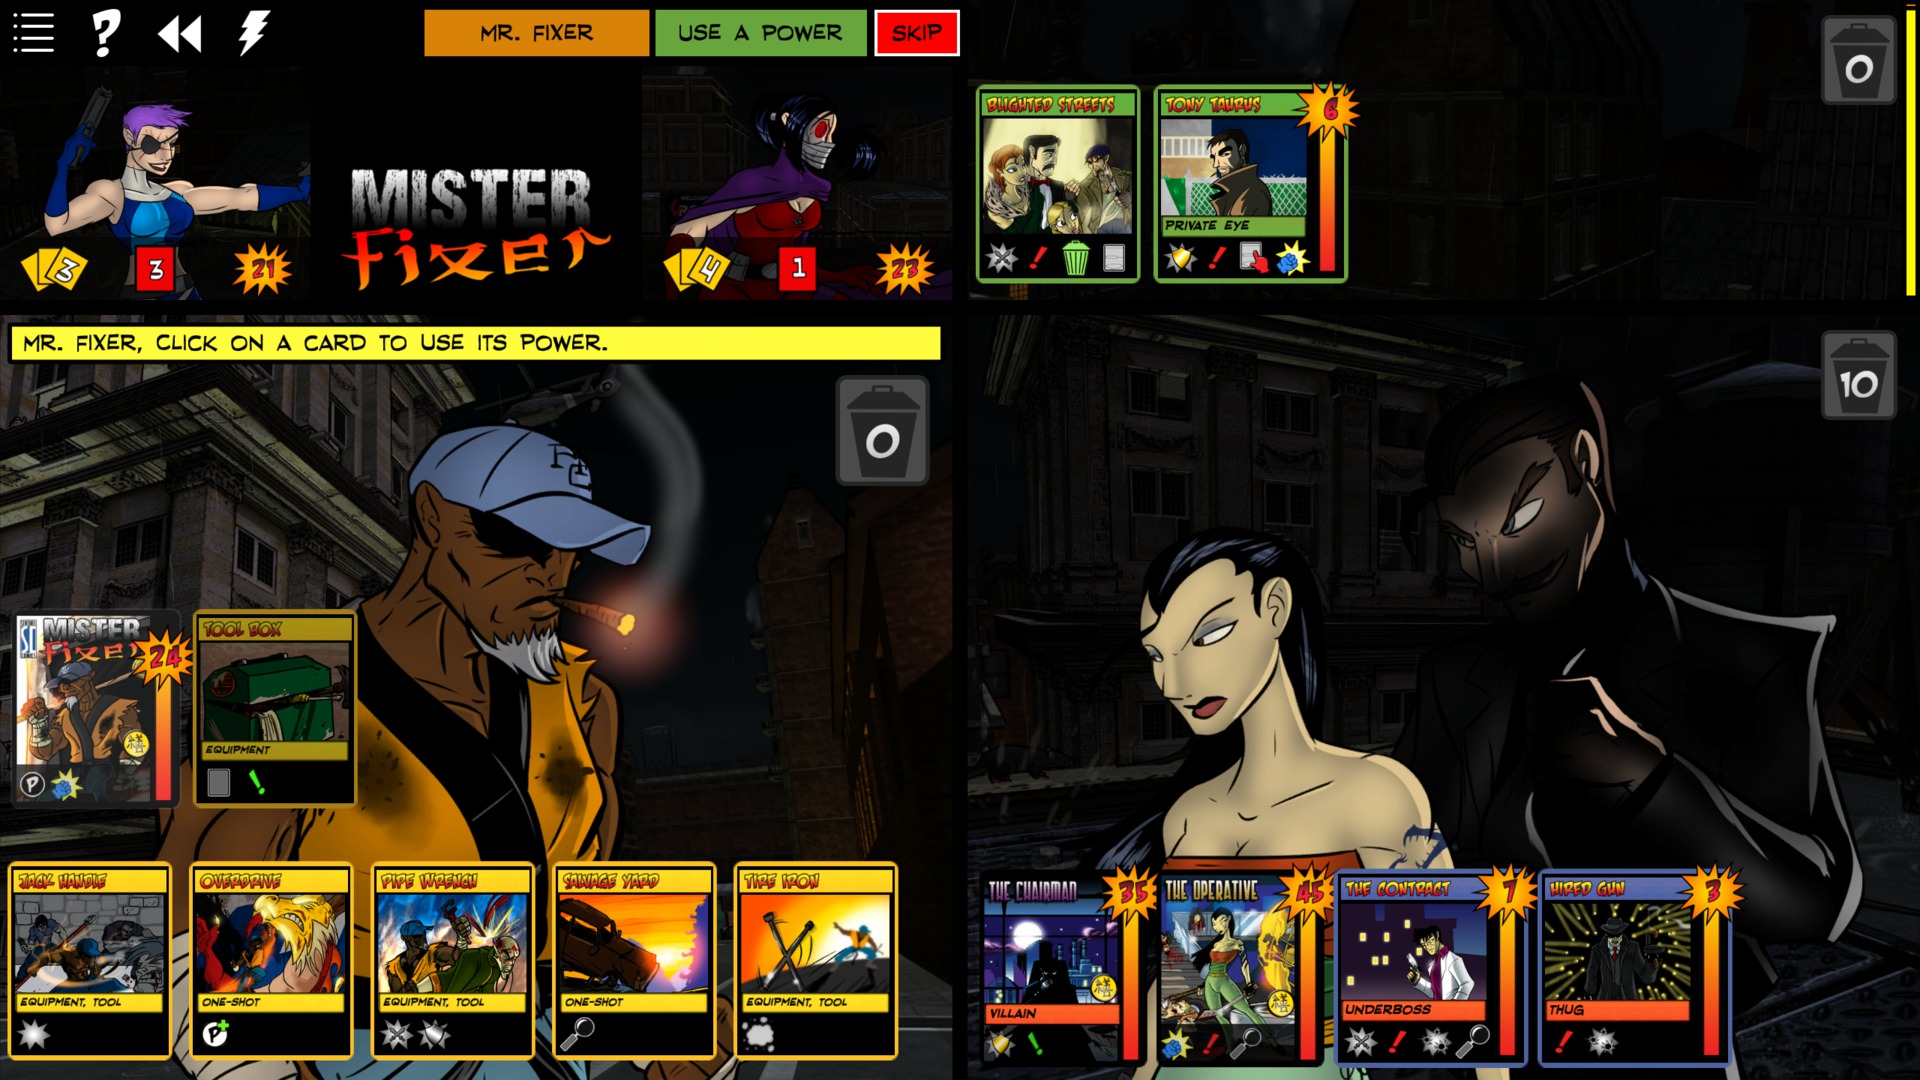 Sentinels of the Multiverse - Soundtrack (Volume 2) Featured Screenshot #1